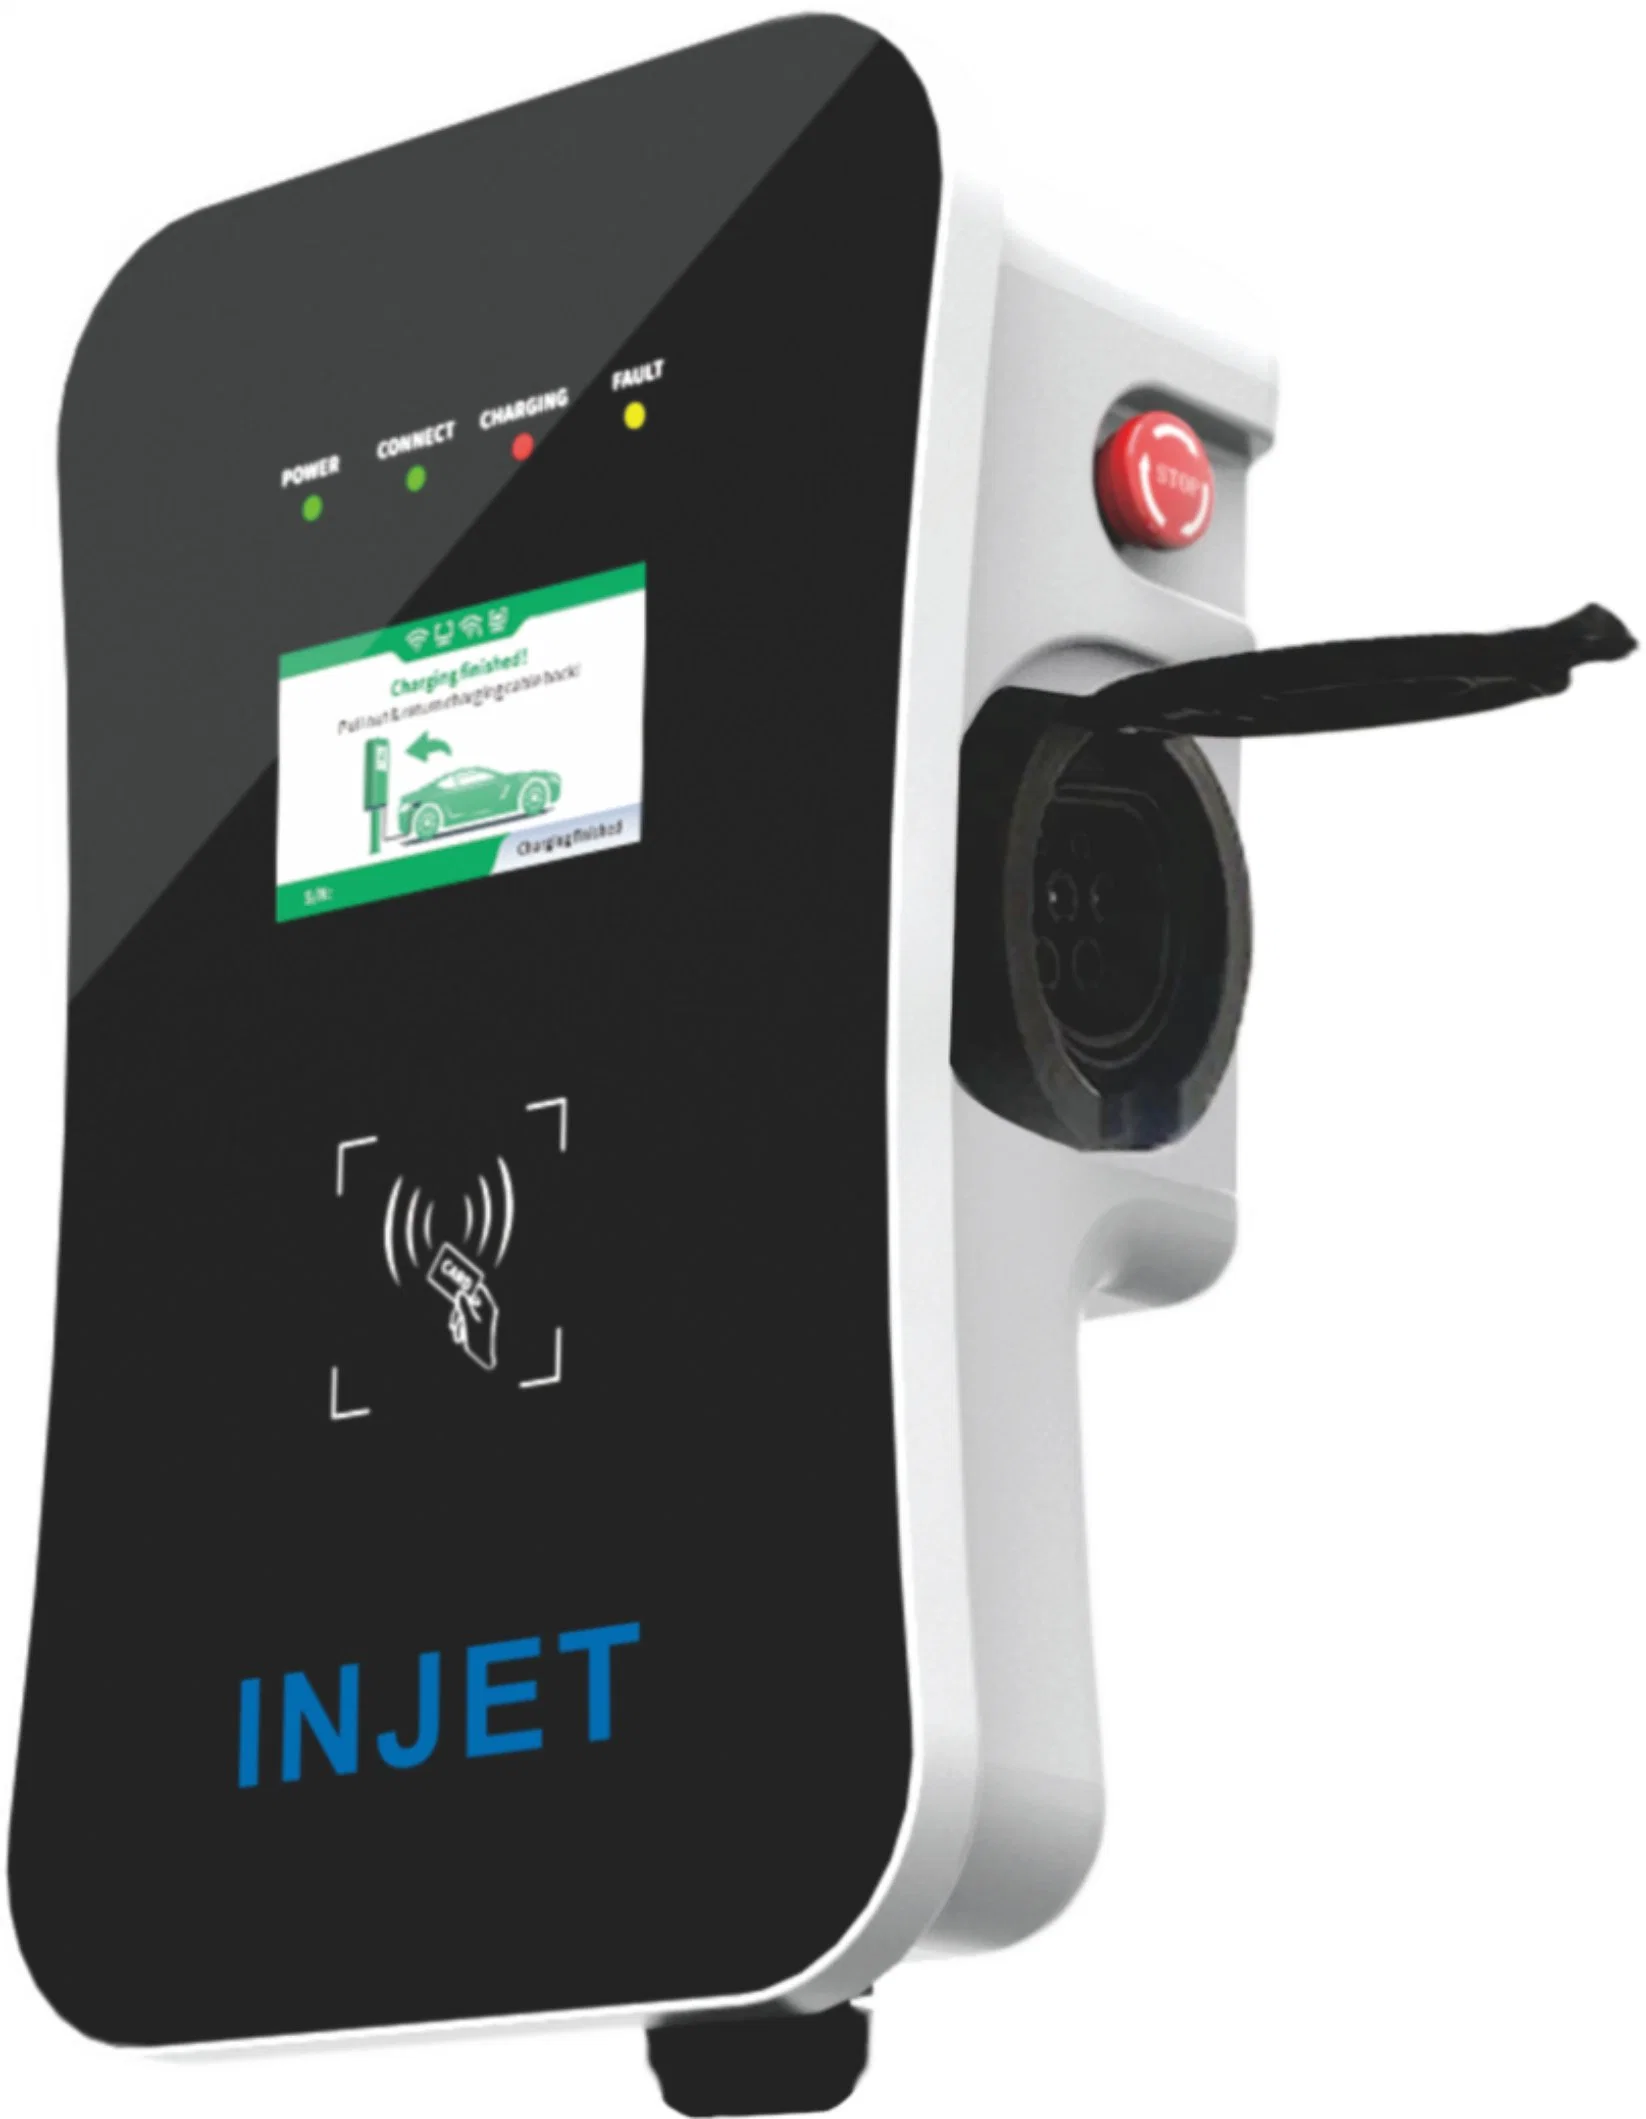 Weeyu IEC 62196-2 Wallbox Smart Wireless WiFi EV Charger with Type 2 Connector